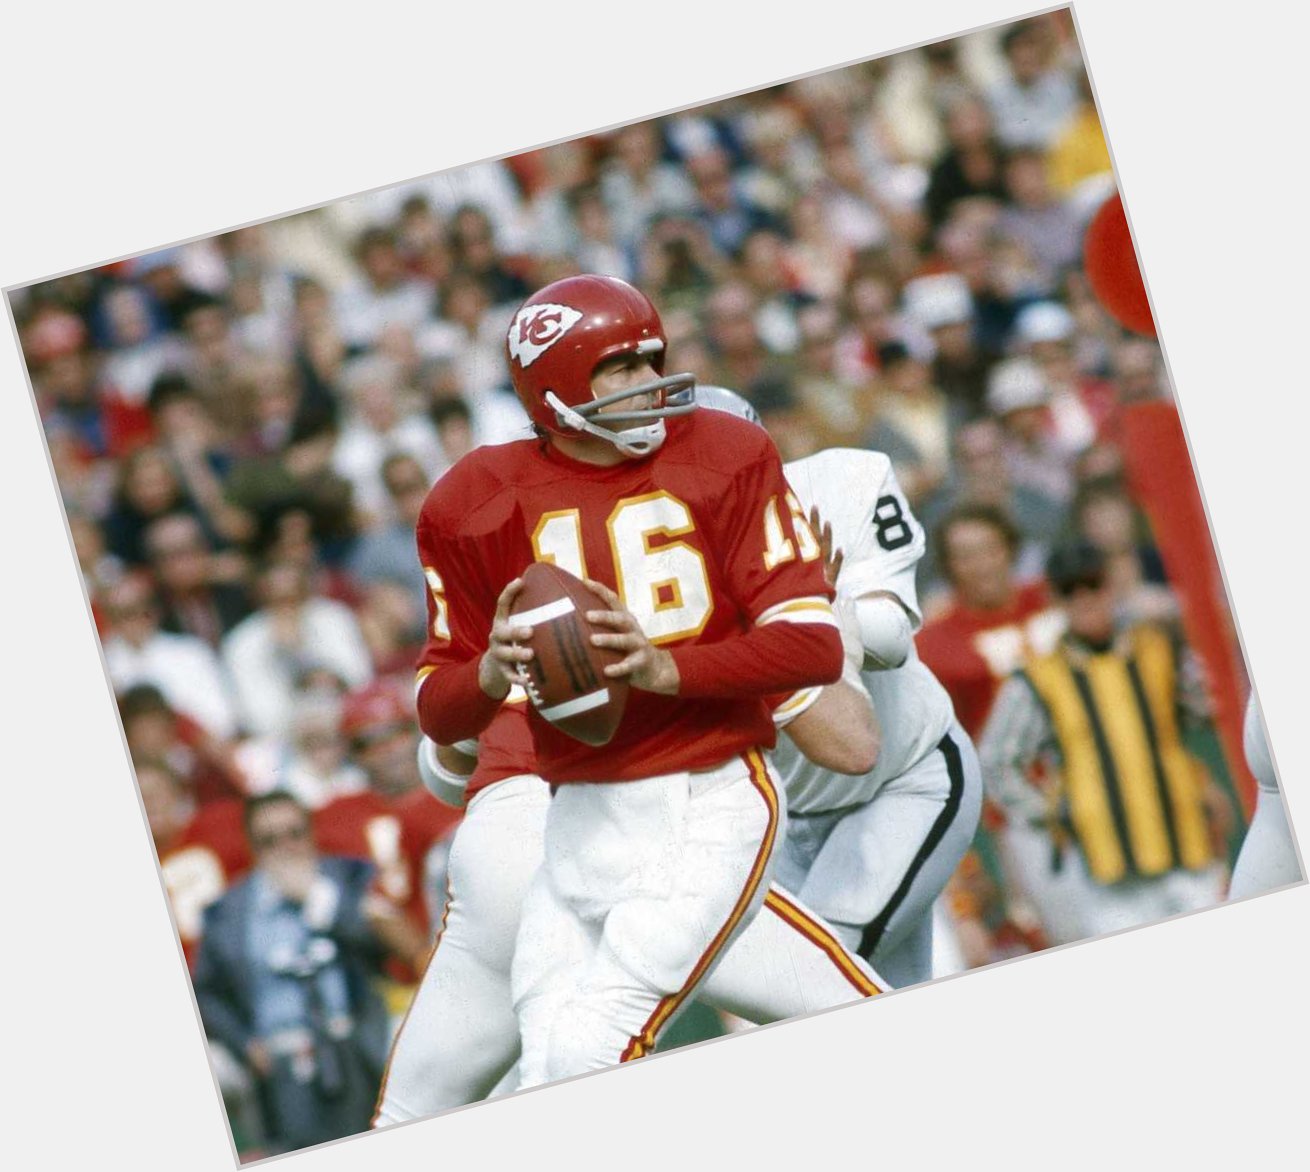 Happy Birthday to the late, great Len Dawson, the all-time Chiefs passing leader! 